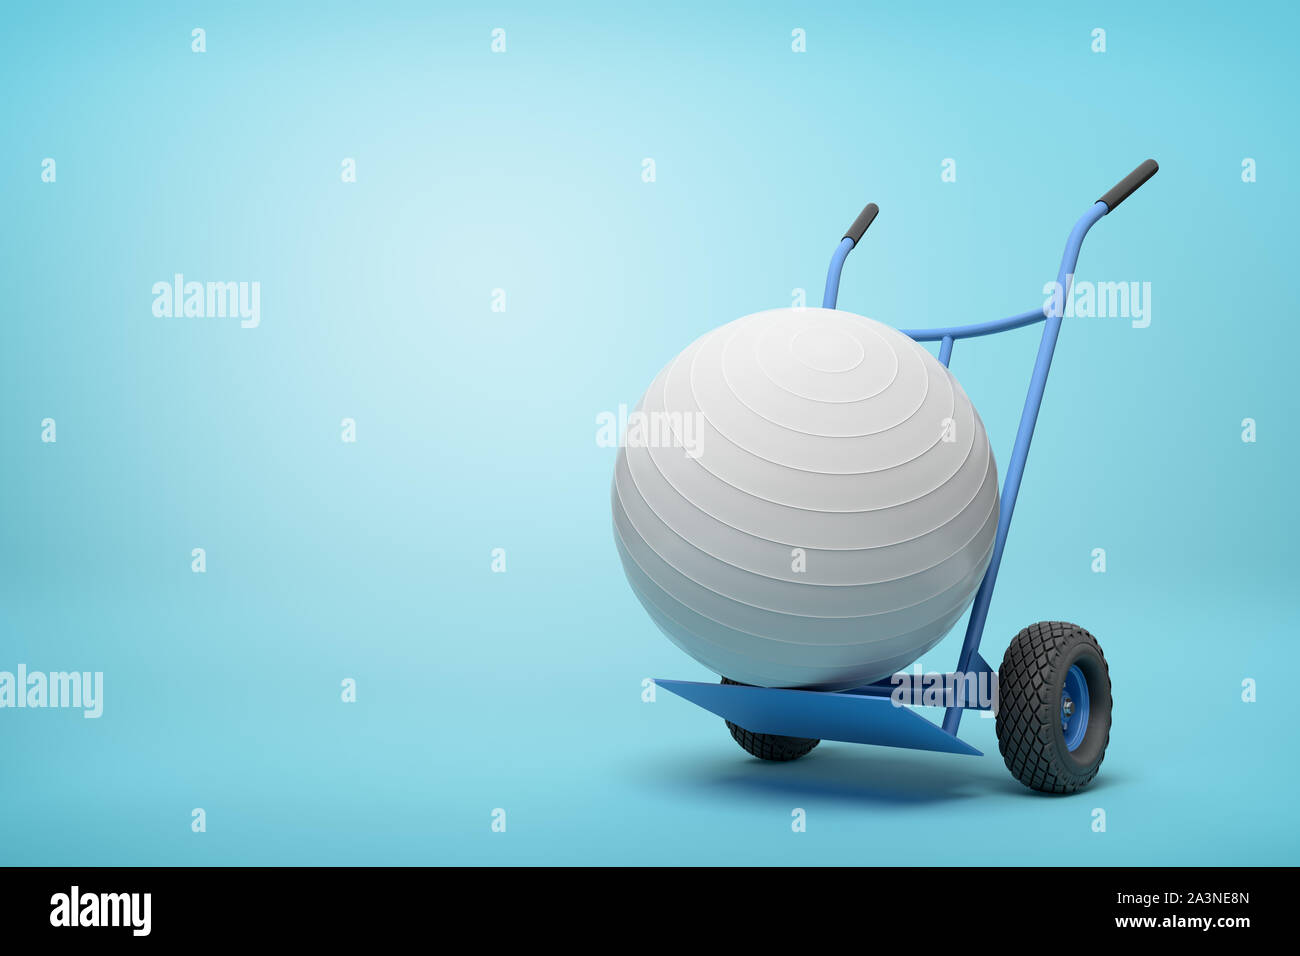 3d rendering of white yoga exercise ball on blue hand truck on light-blue background with copy space. Stock Photo